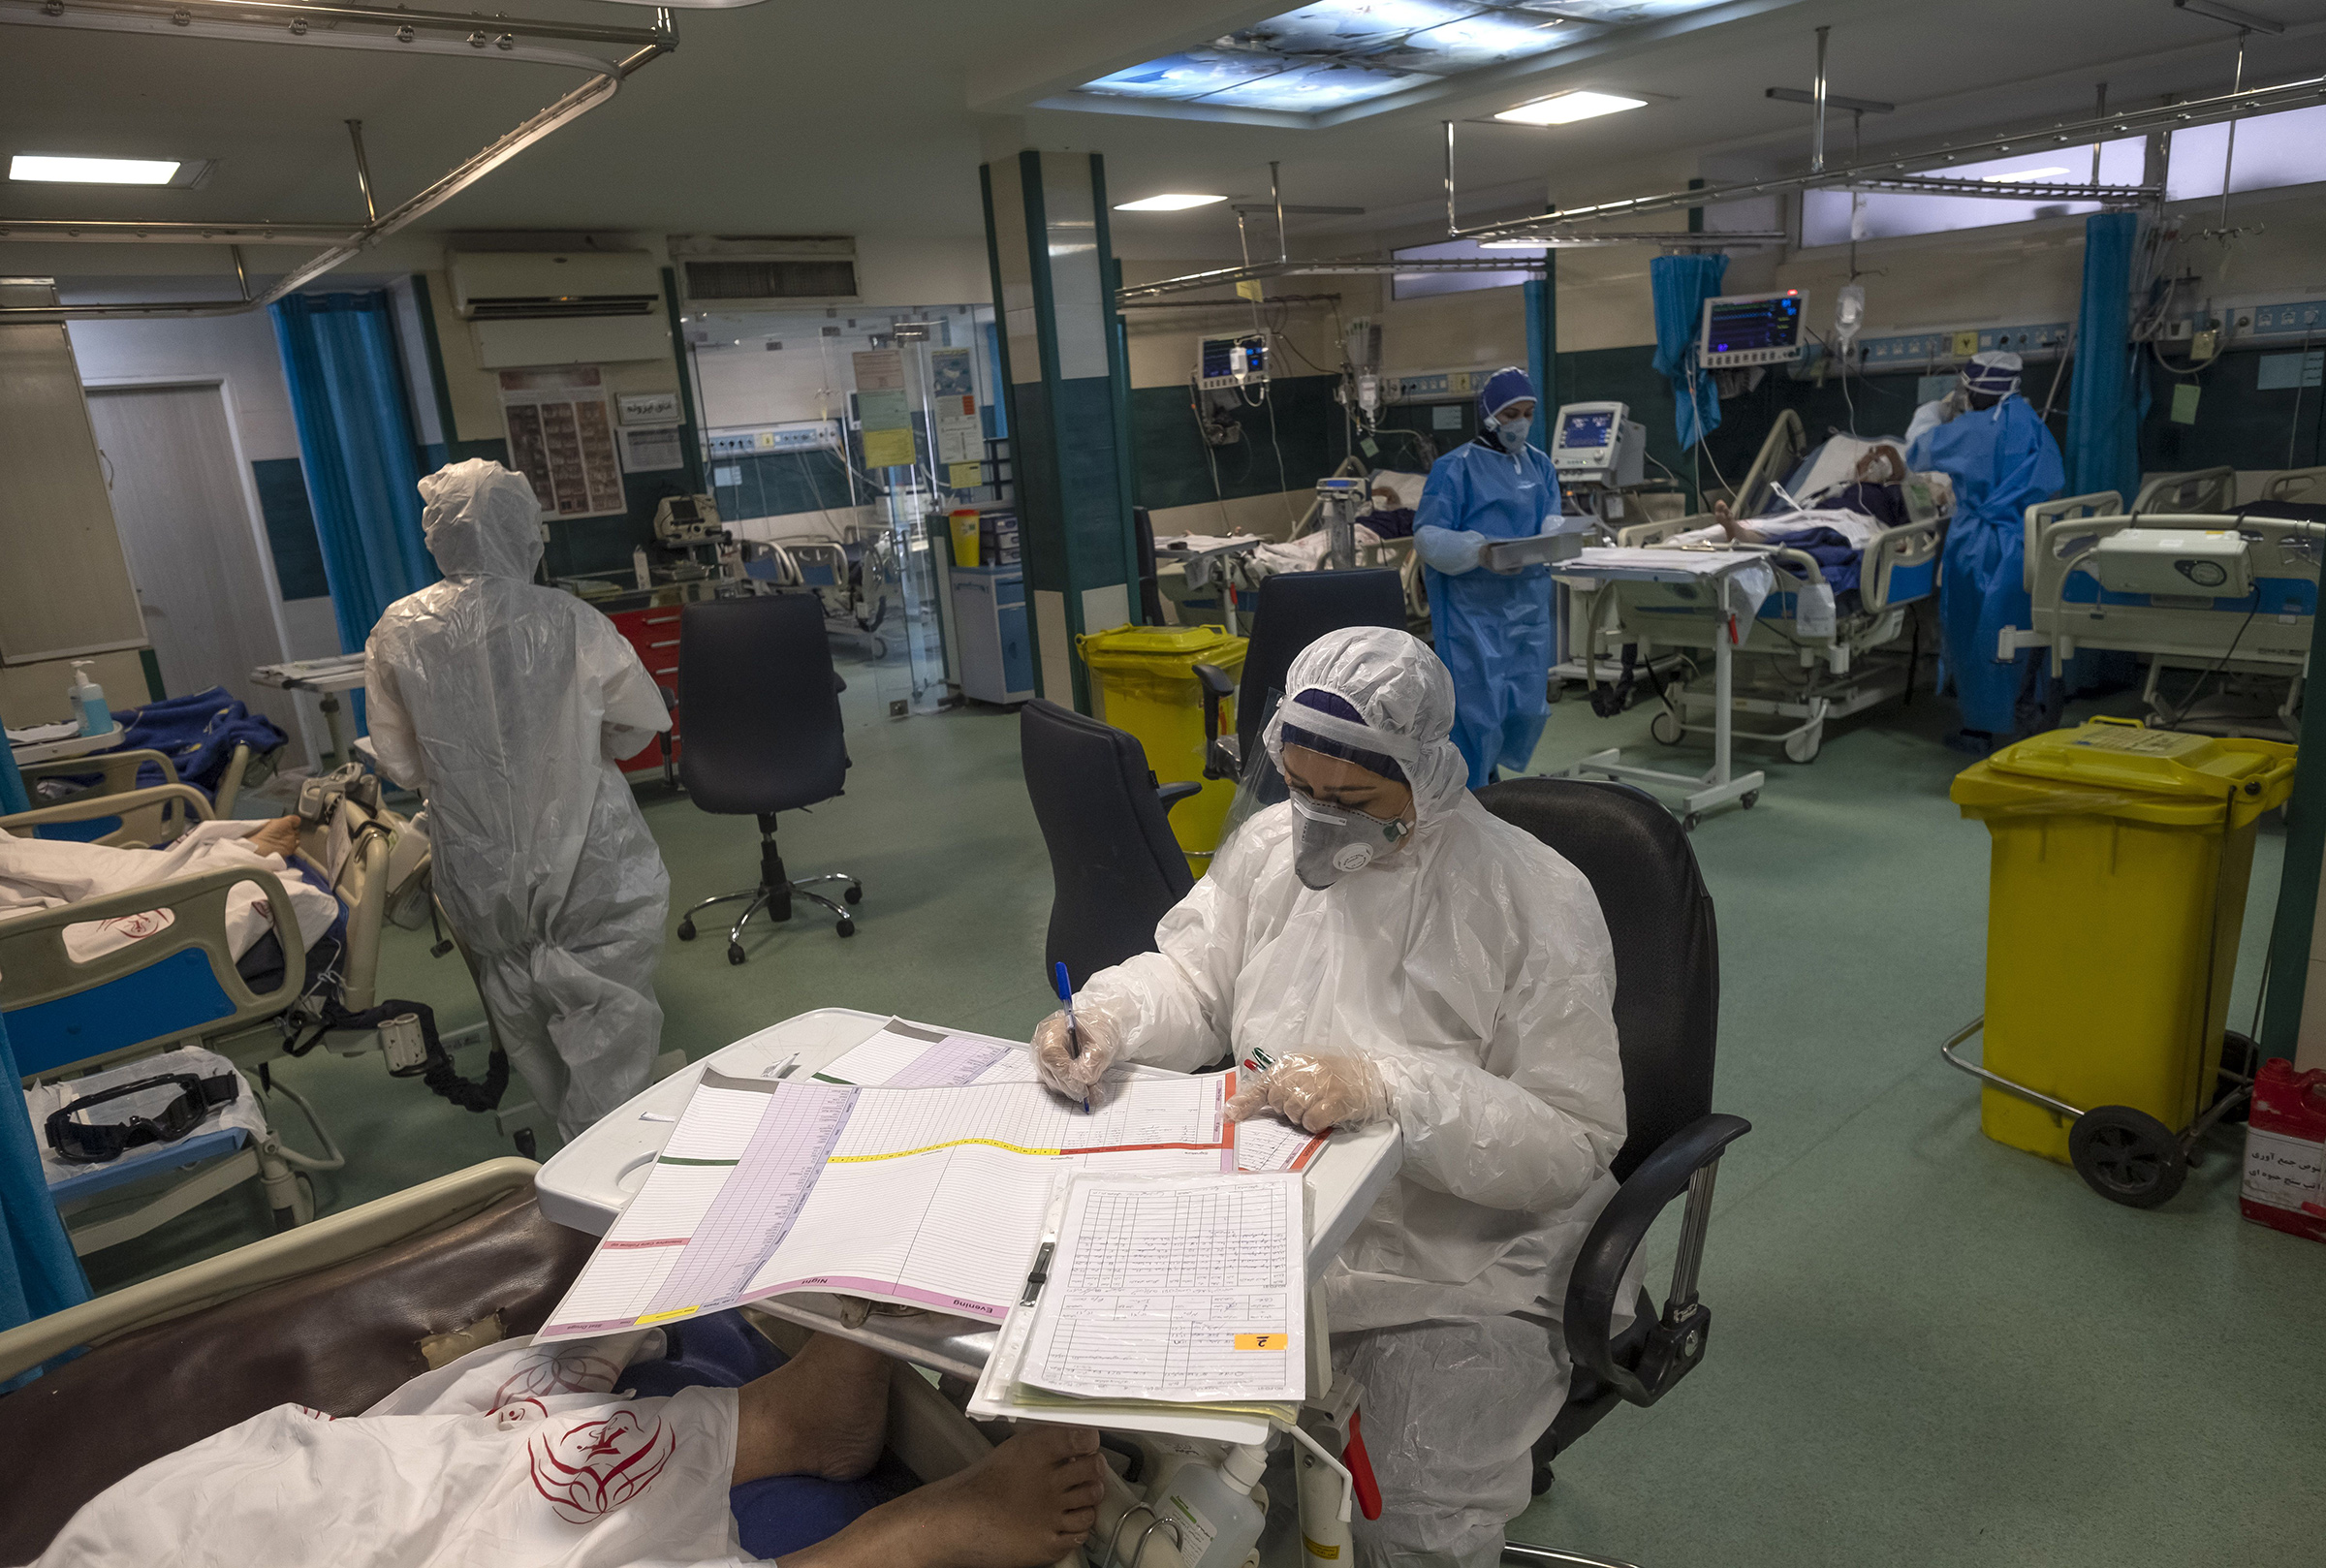 An Iranian medical personnel wearing protective gear works at a quarantine section of the Rassolakram hospital in western Tehran following a new coronavirus outbreak in Iran on March 11. (Morteza Nikoubazl—SIPA)